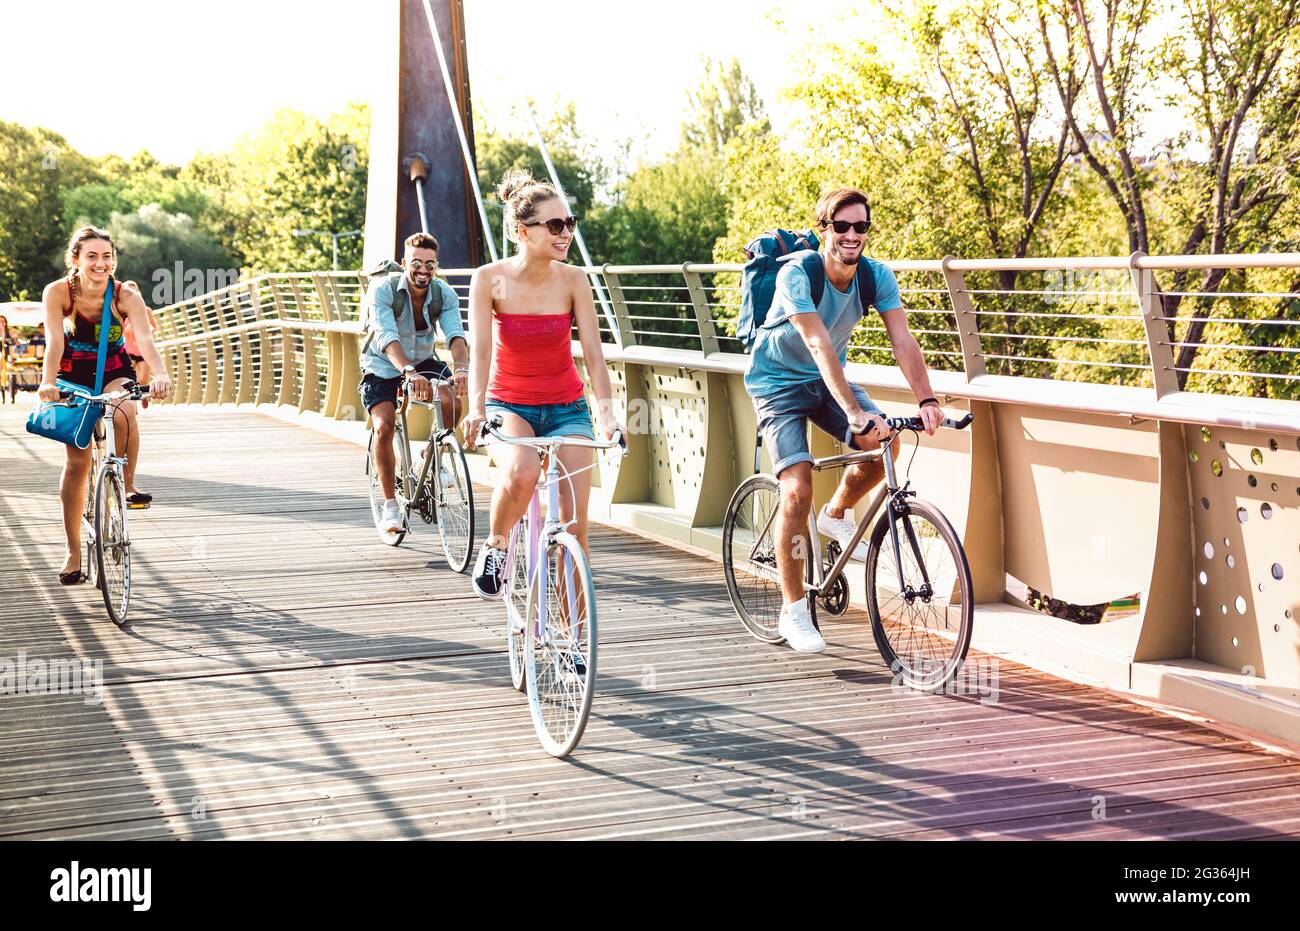 Happy milenial friends having fun riding bike at city park bridge - Life style concept with young hipster students biking together on bicycle lane Stock Photo